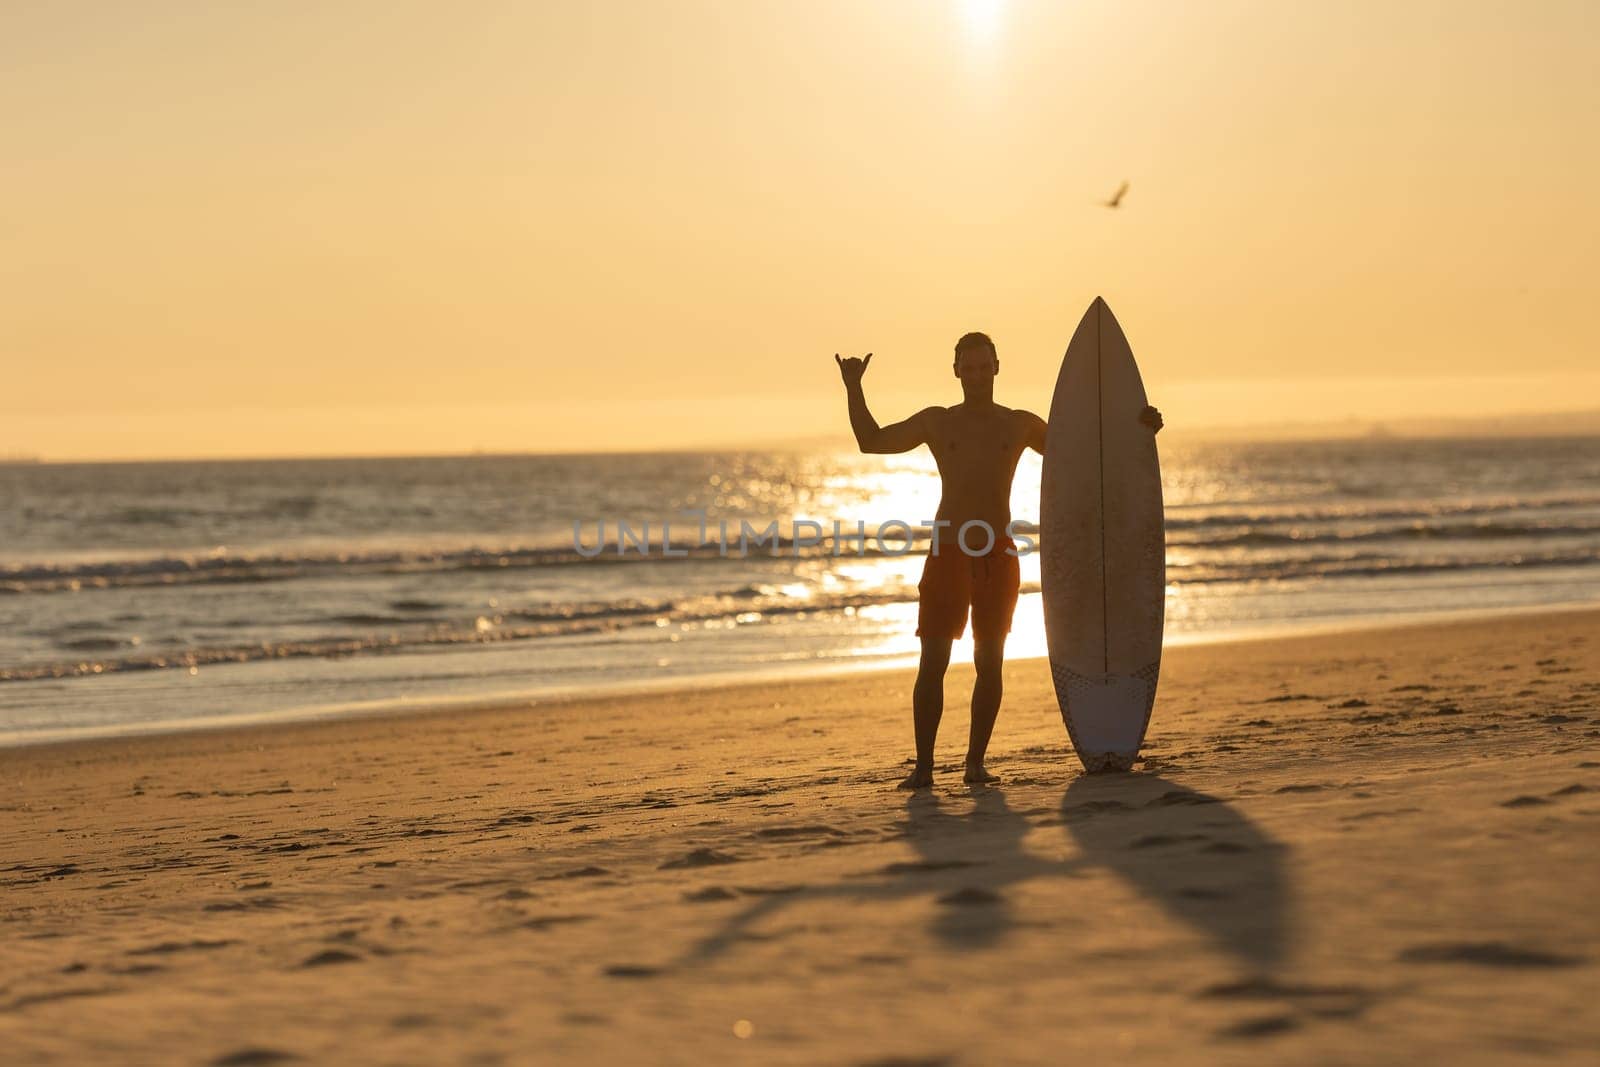 Silhouette of a man standing on the shore holding a surfboard and showing shaka. Mid shot